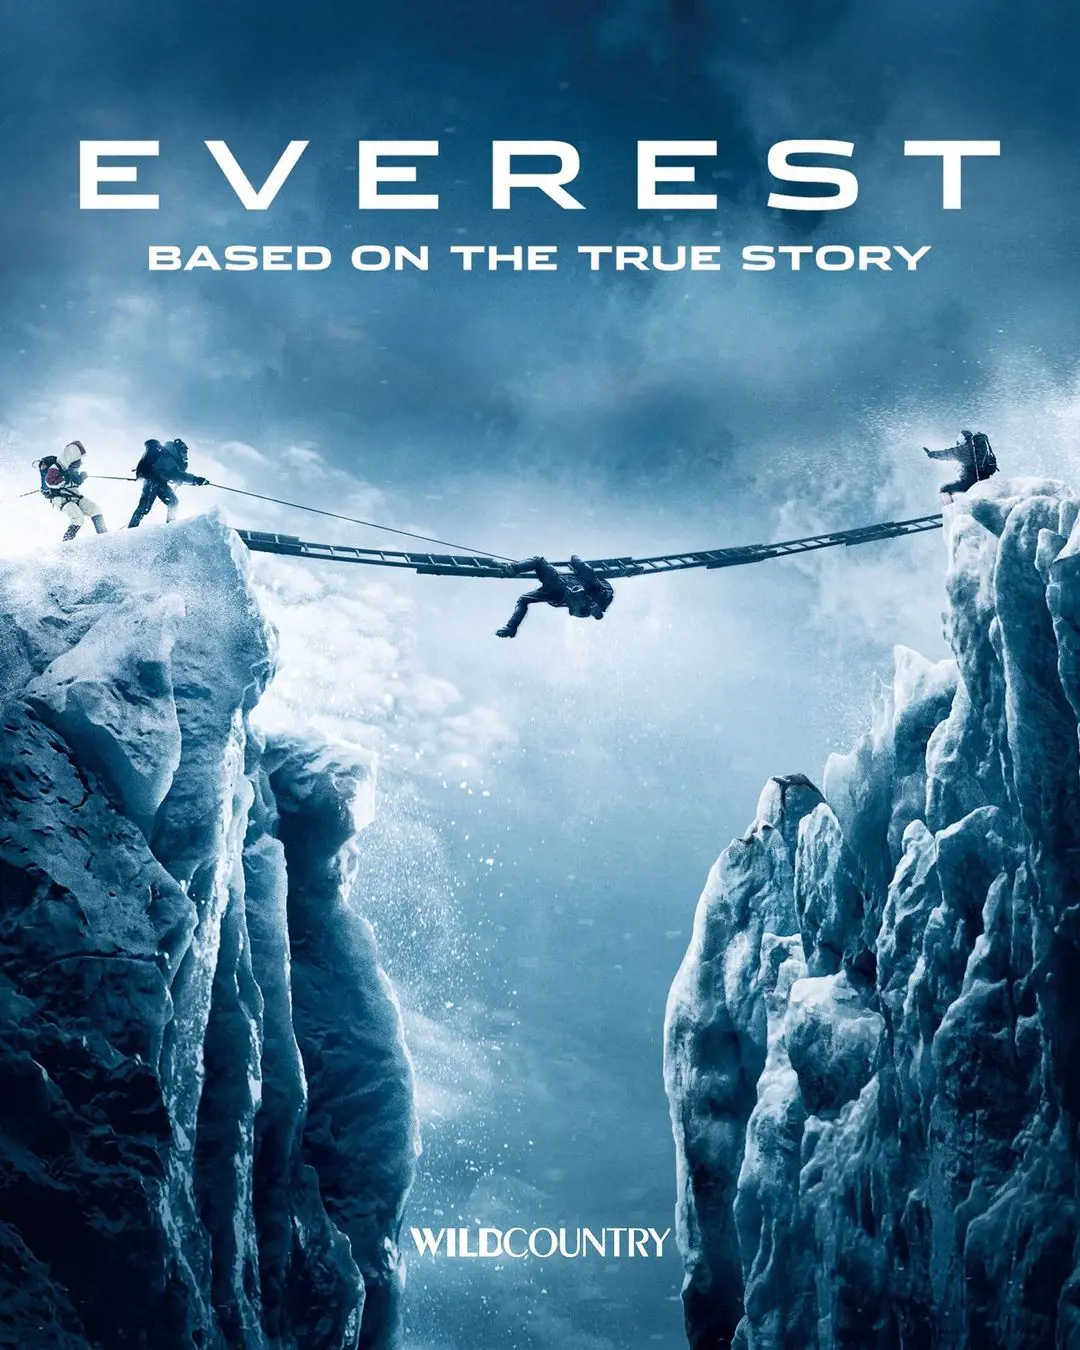 Everest is based on a true story of two expedition team caught in blizzard. 